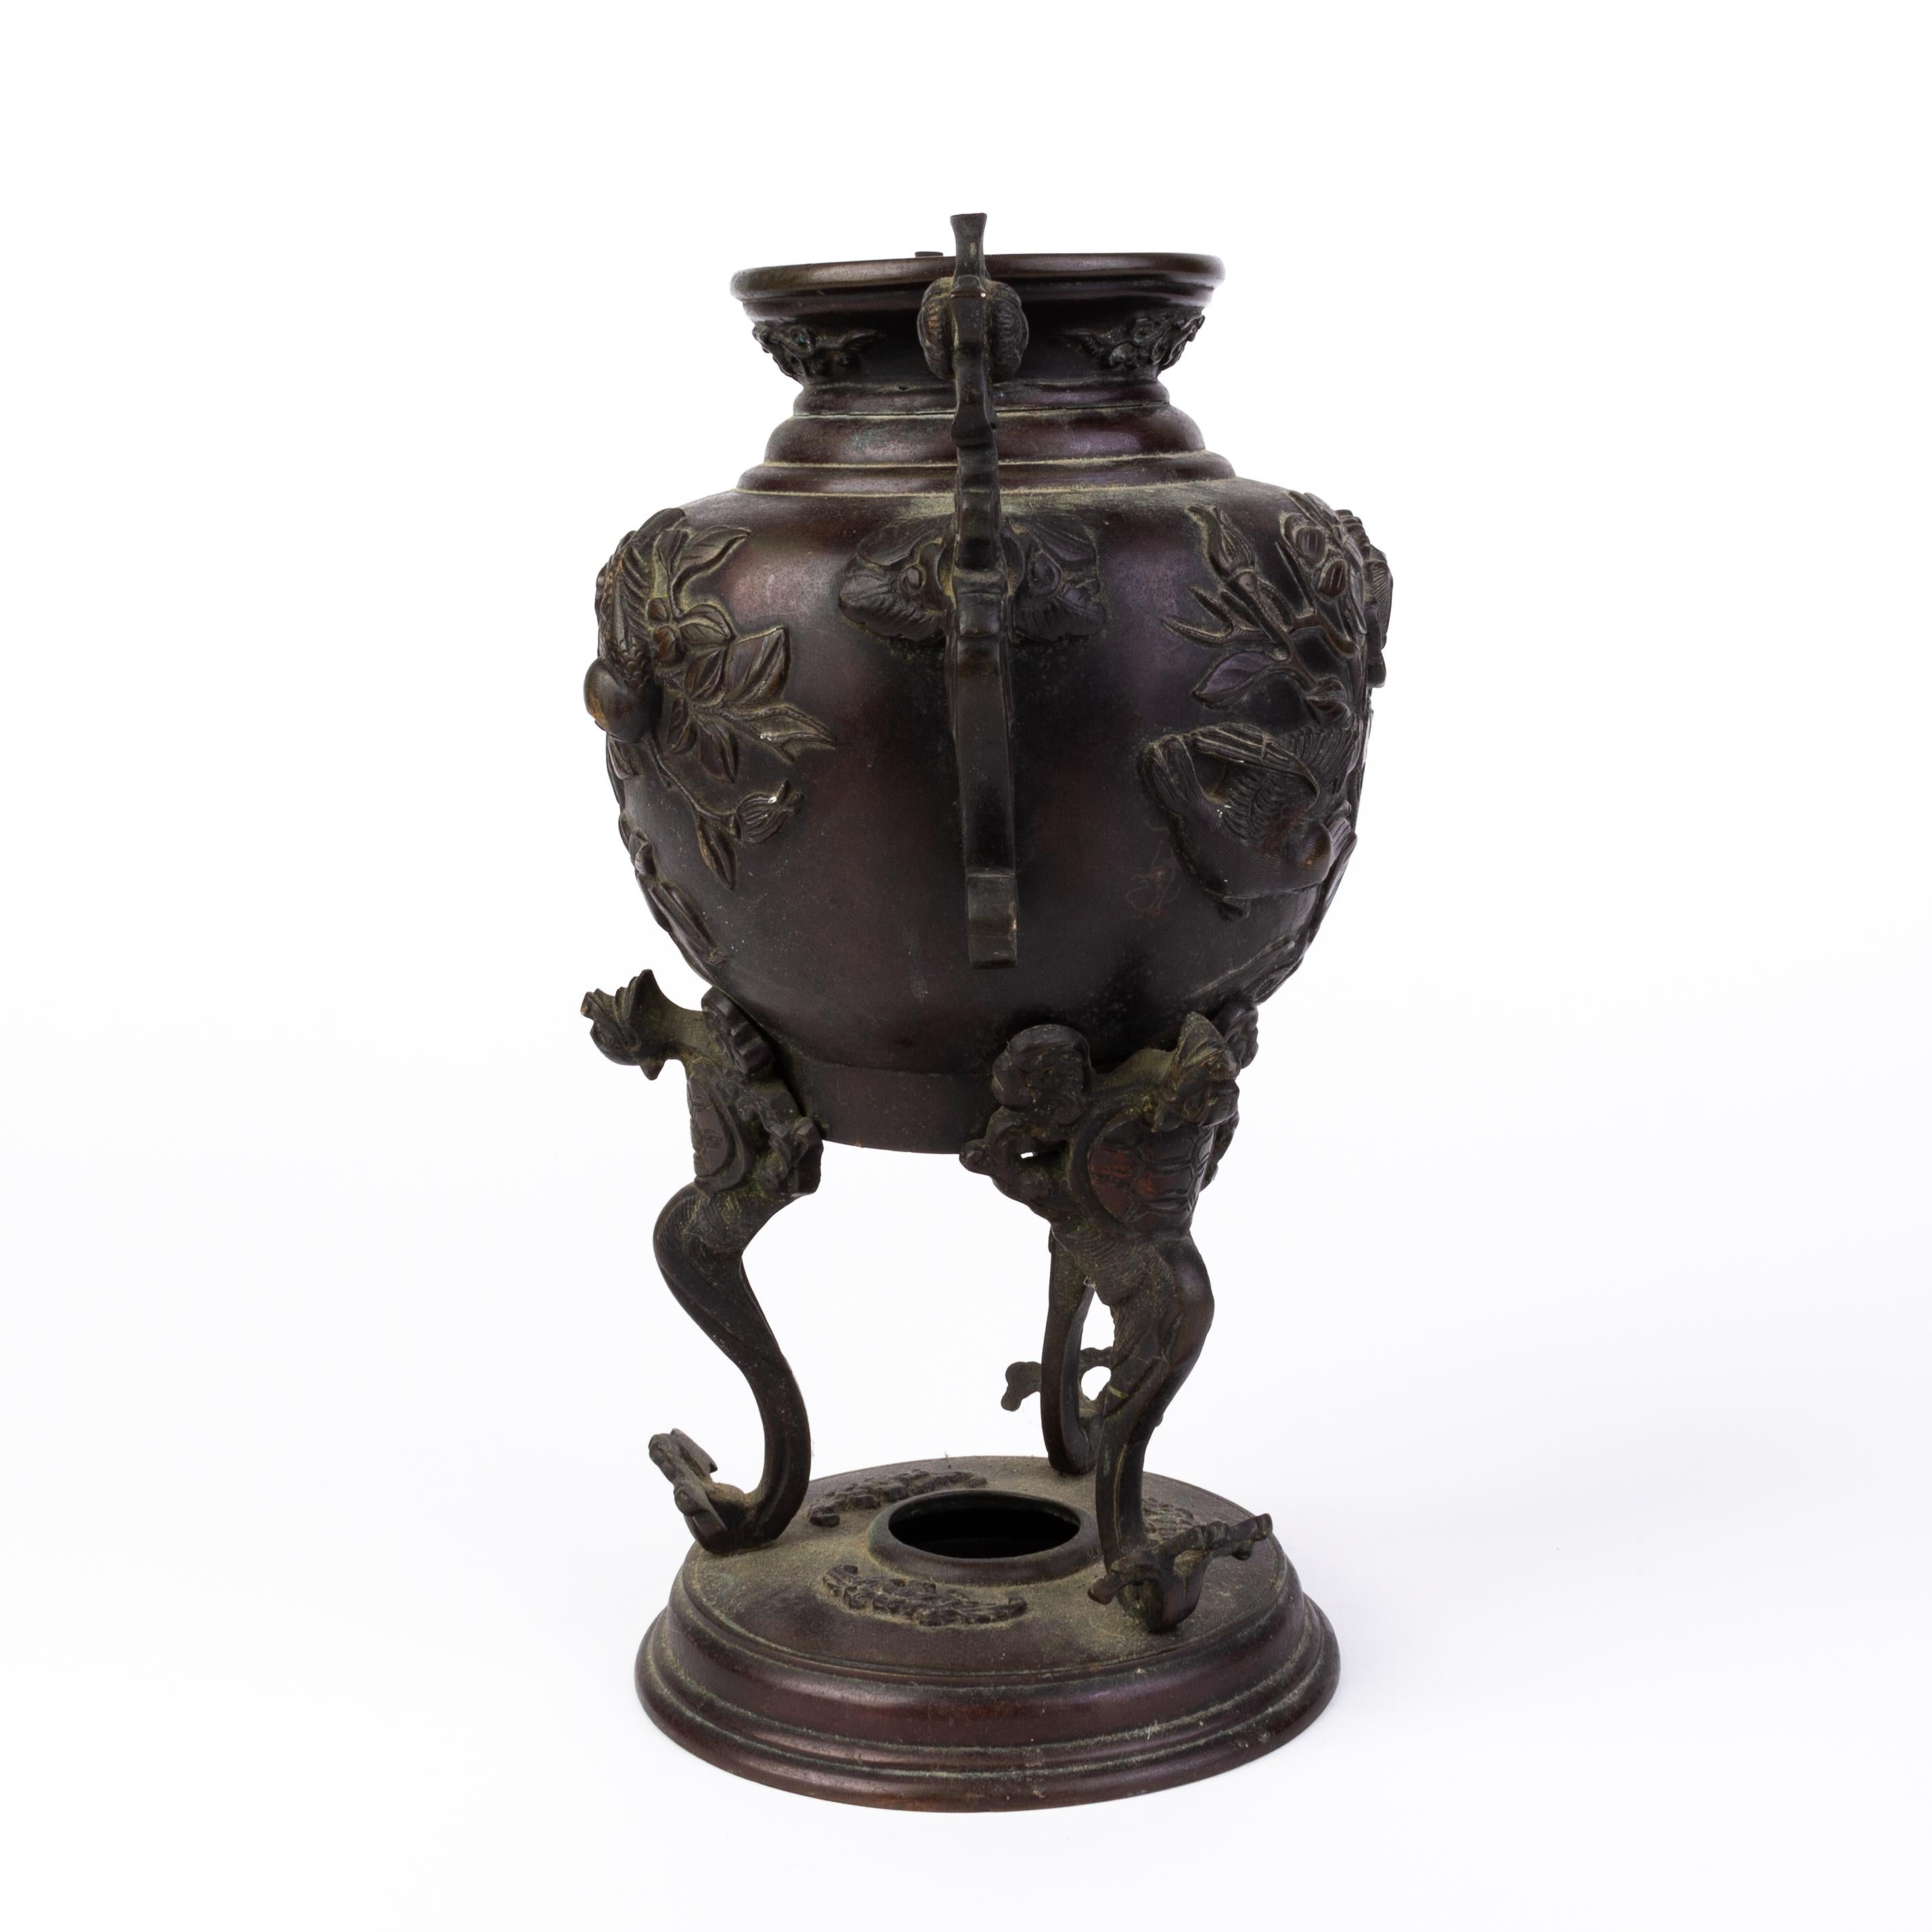 Late 19th century Japanese bronze censer vase.
From a private collection.
Free international shipping.